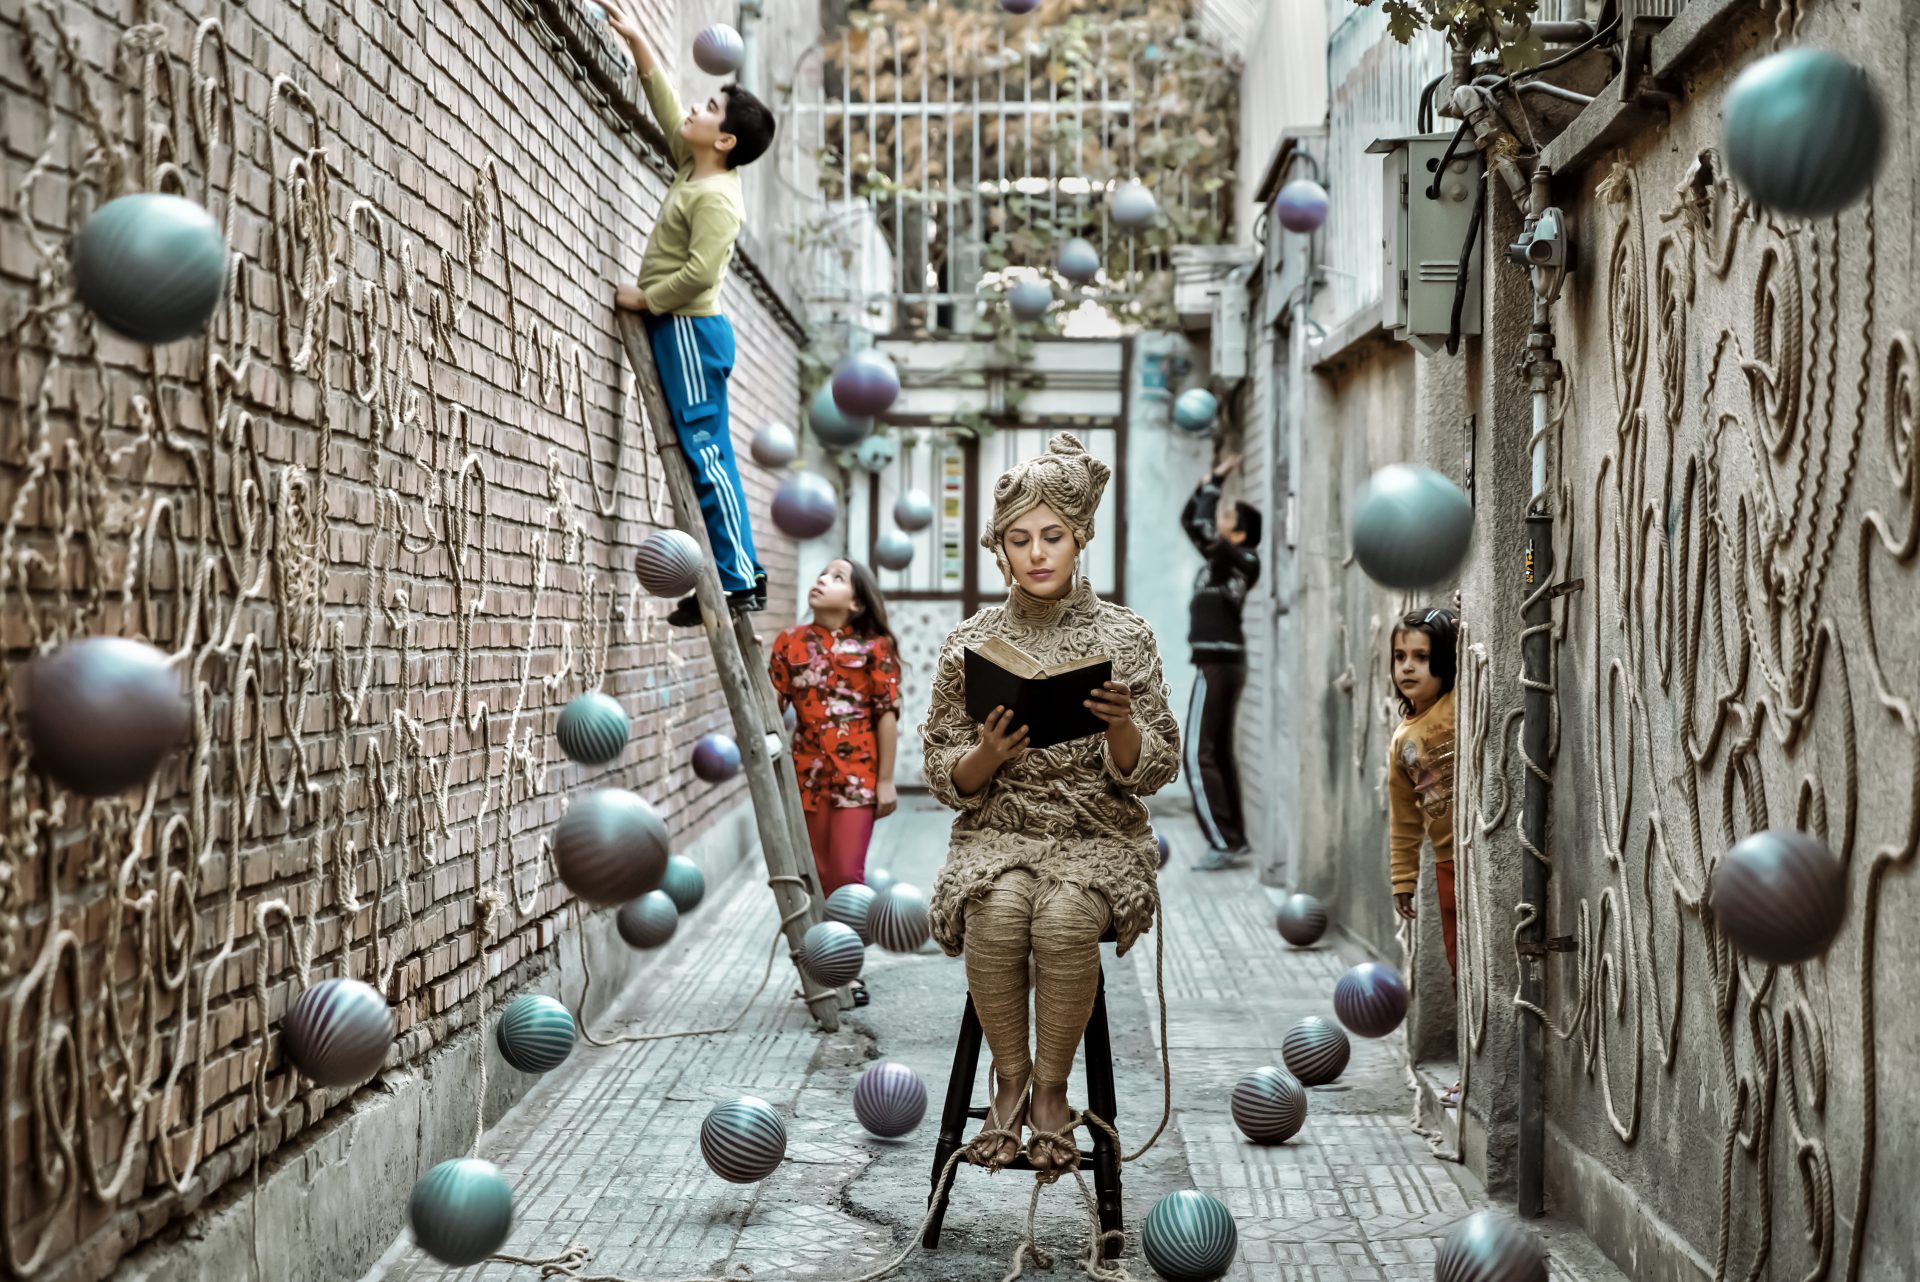 READING FOR TEHRAN STREETS – 2016